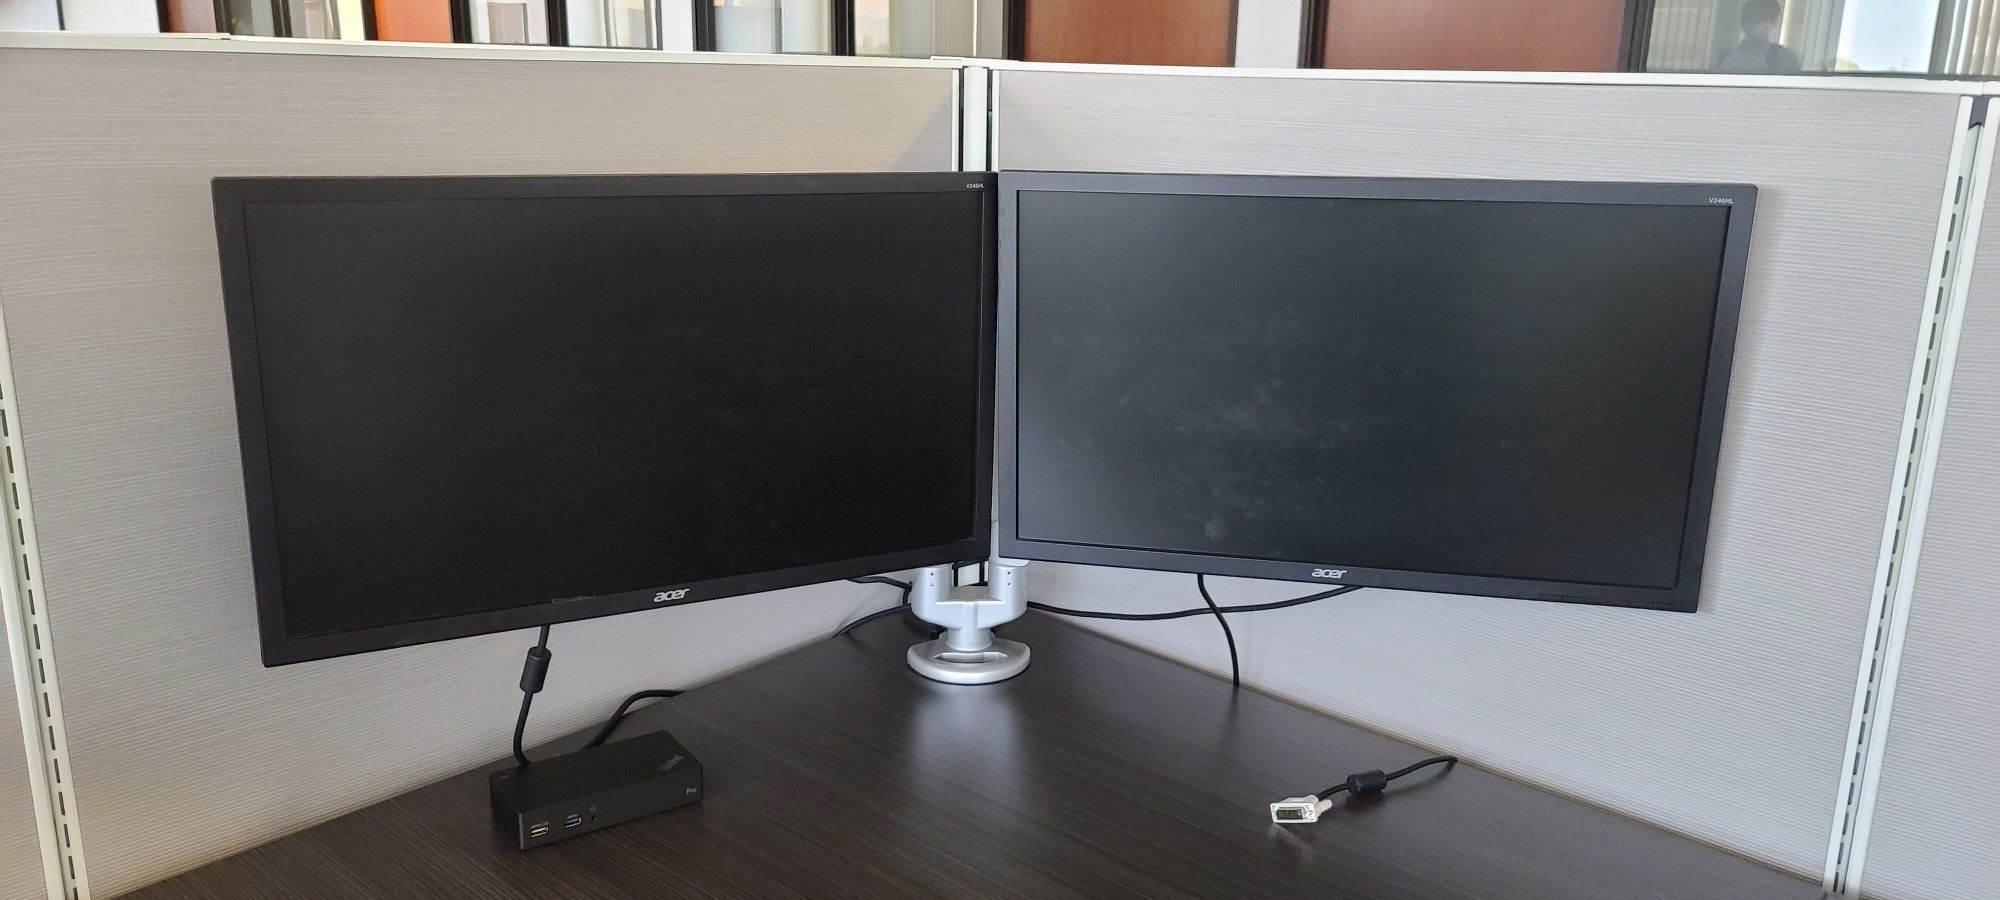 Acer LED 24" monitors and monitor arms